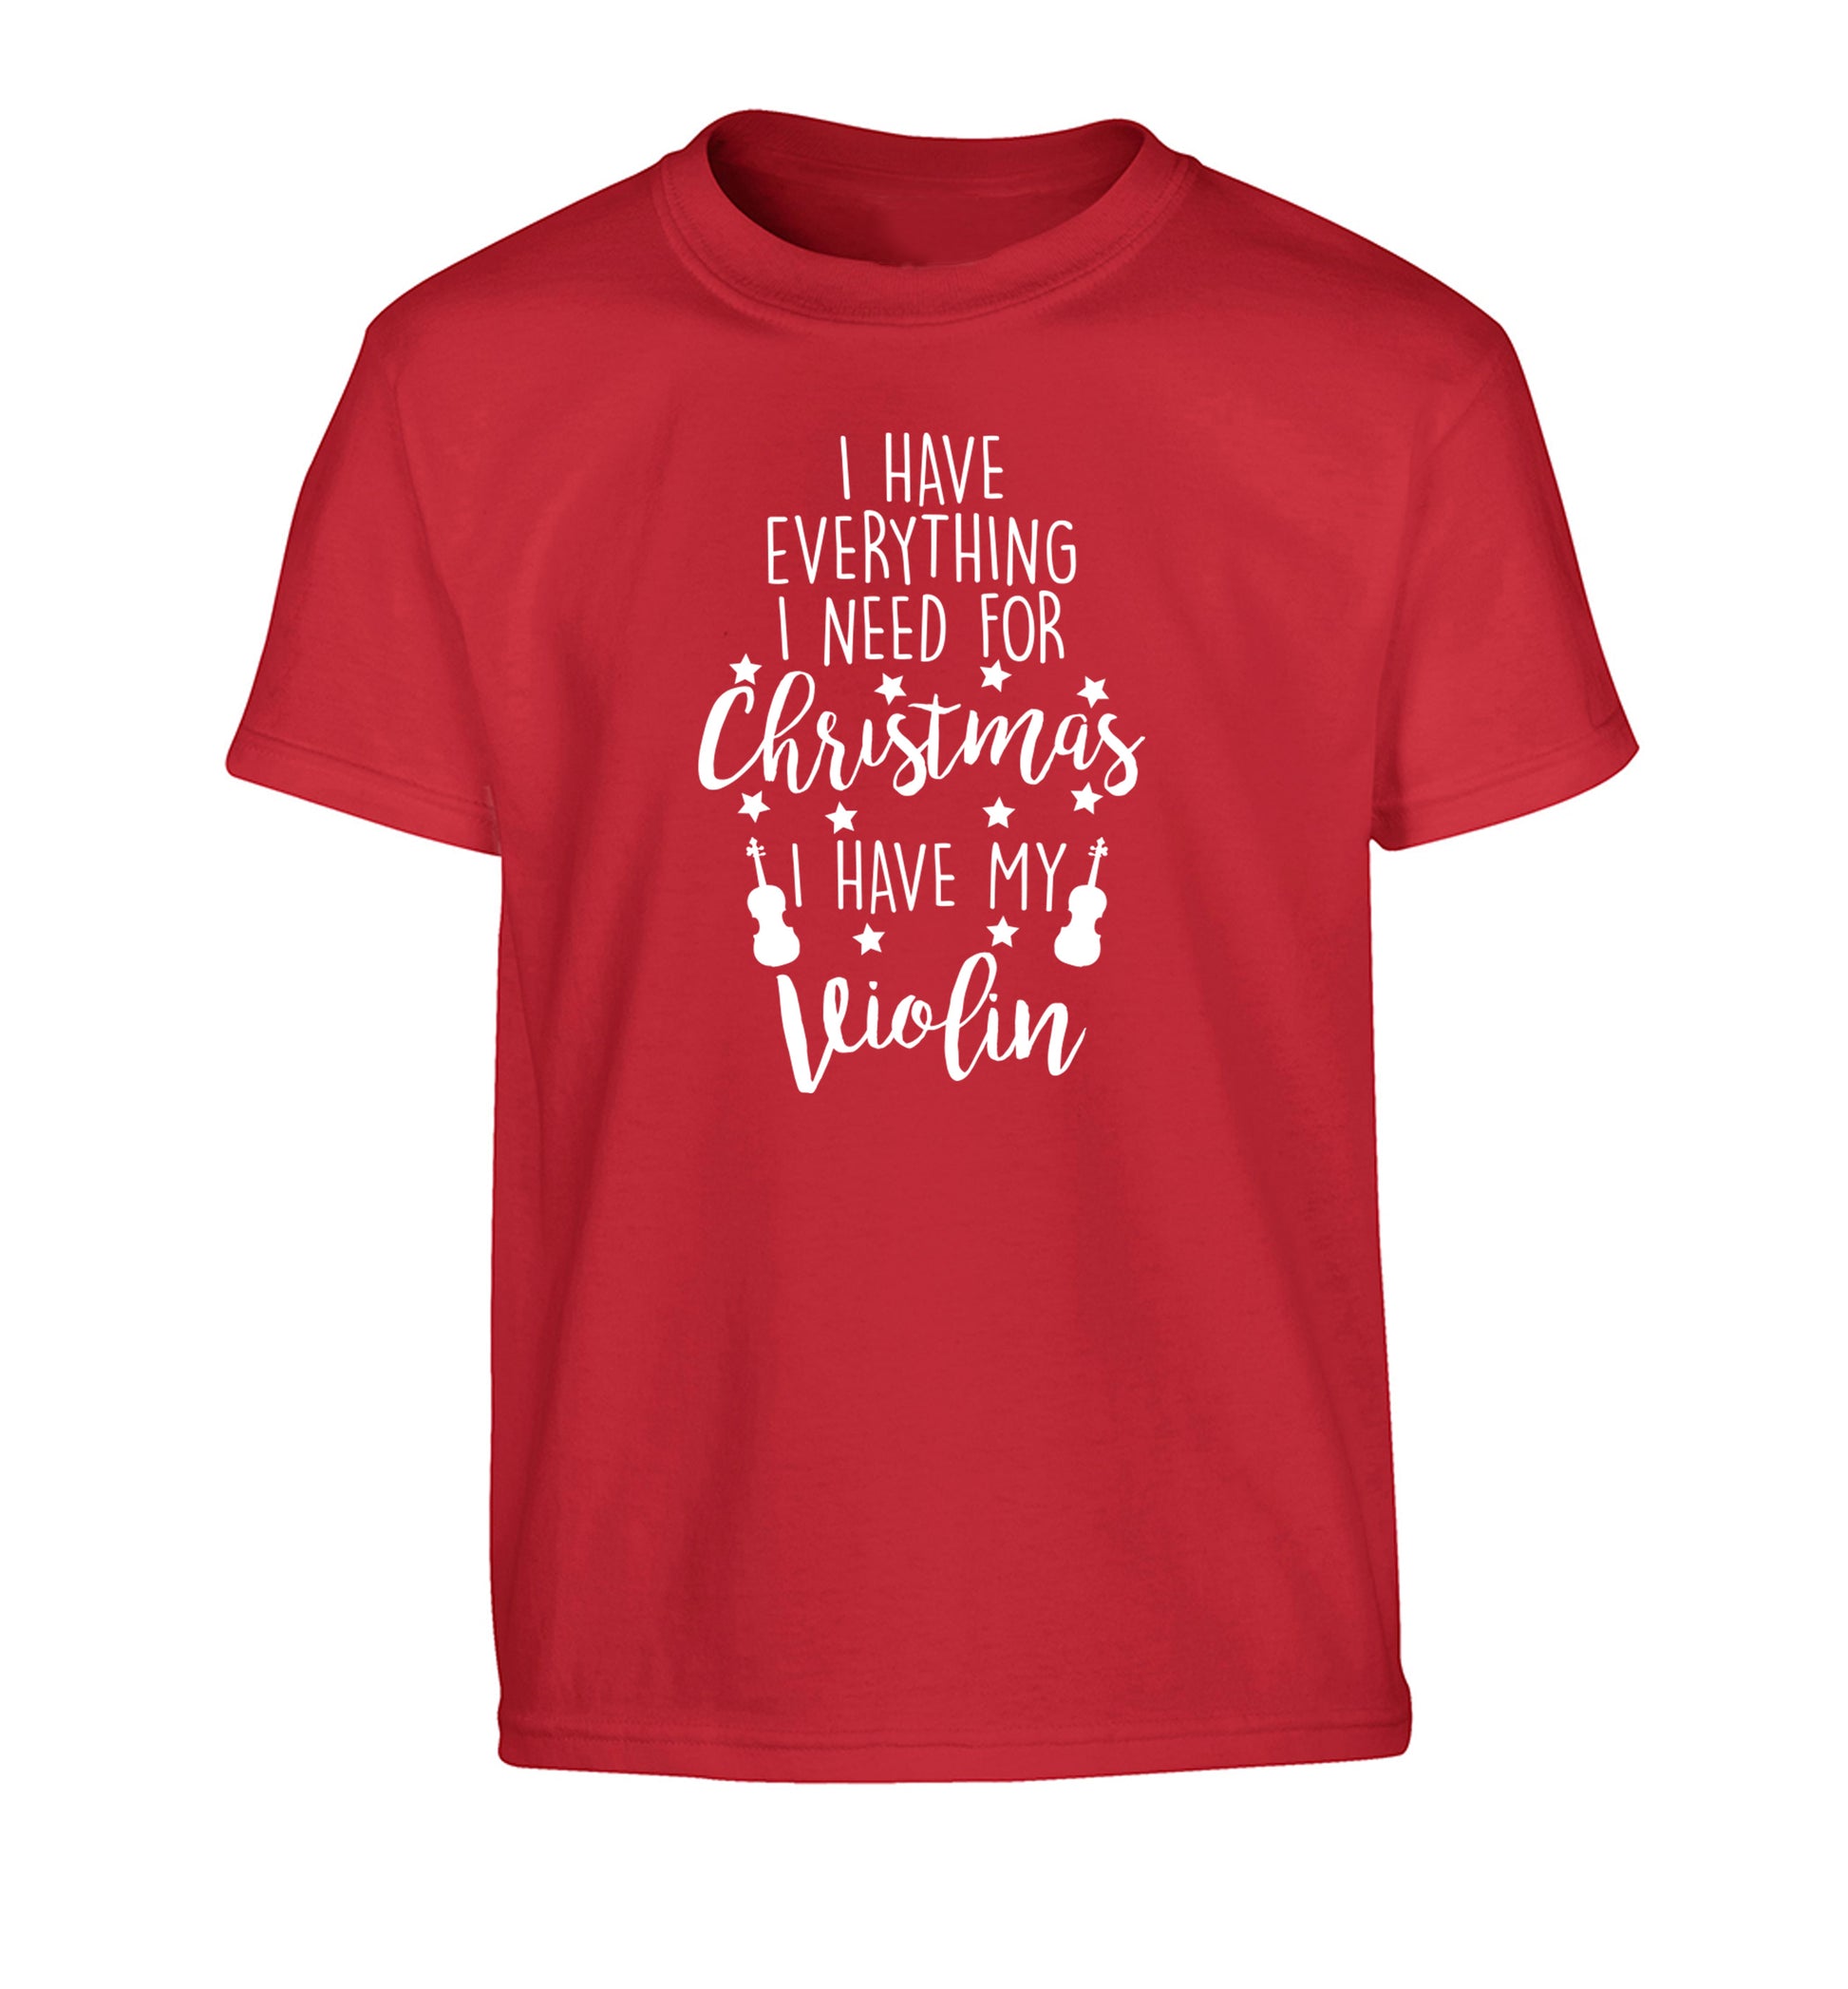 I have everything I need for Christmas I have my violin Children's red Tshirt 12-13 Years